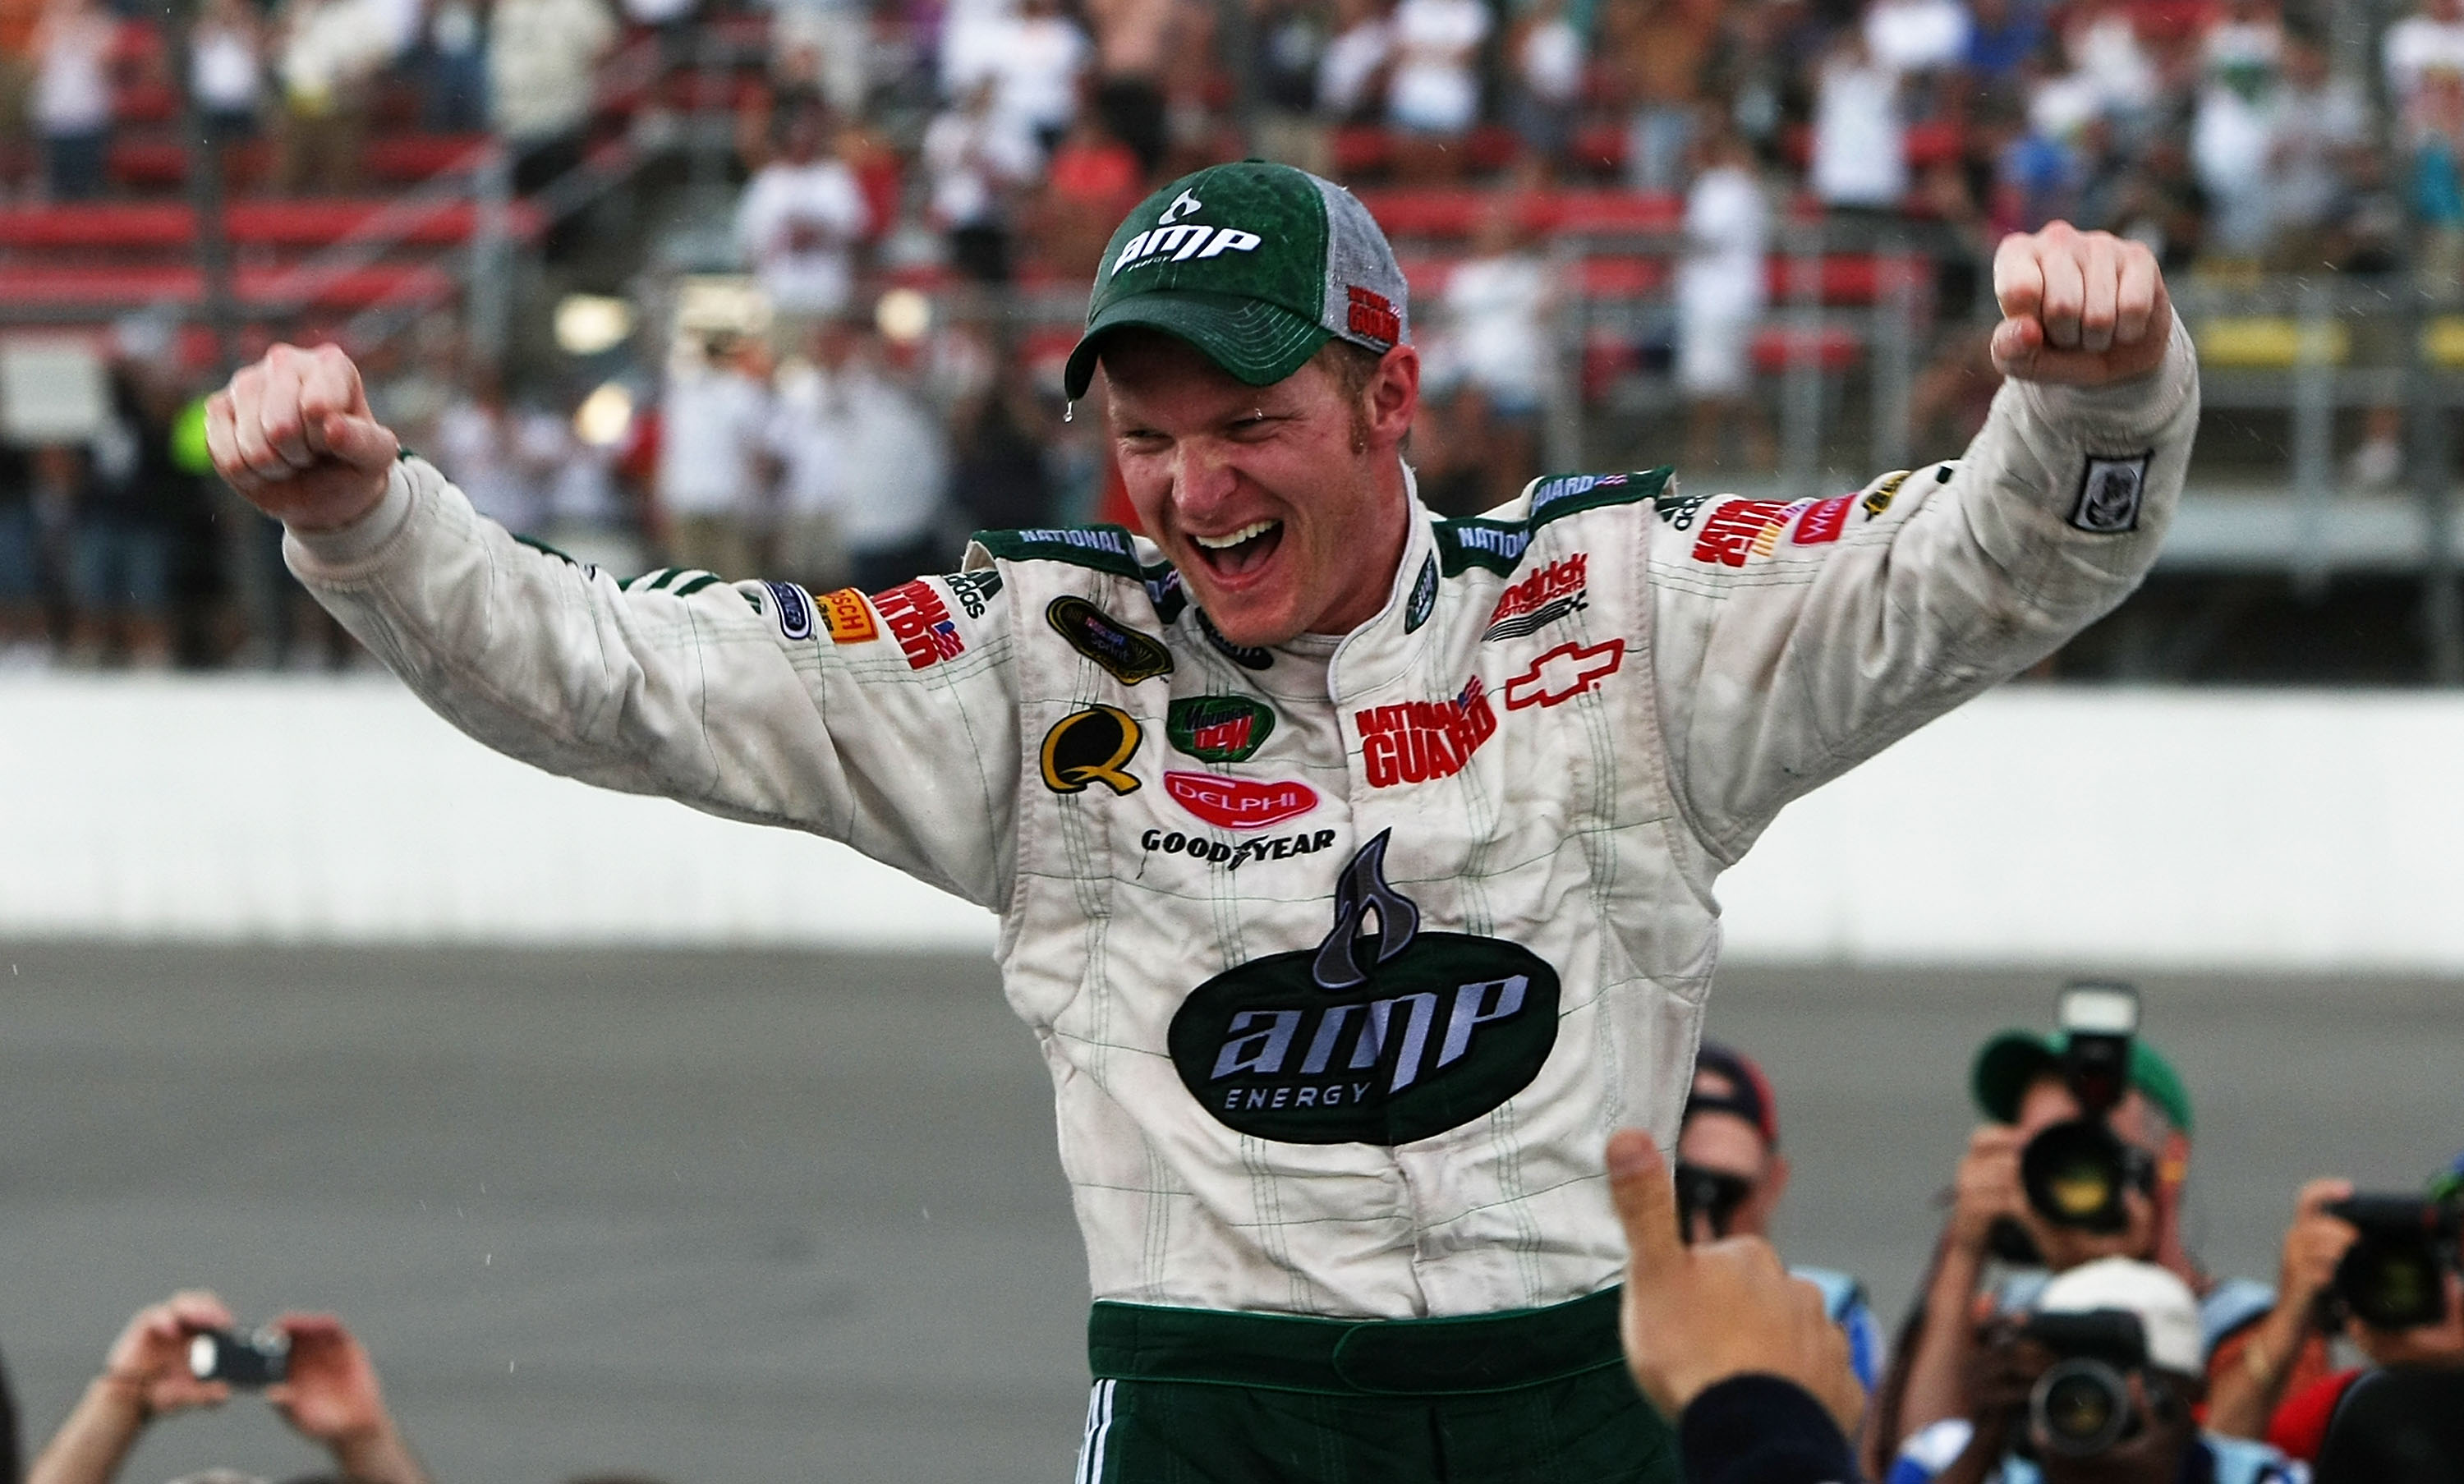 By and large, Dale Earnhardt Jr's MIchigan victories resonate with race fans.